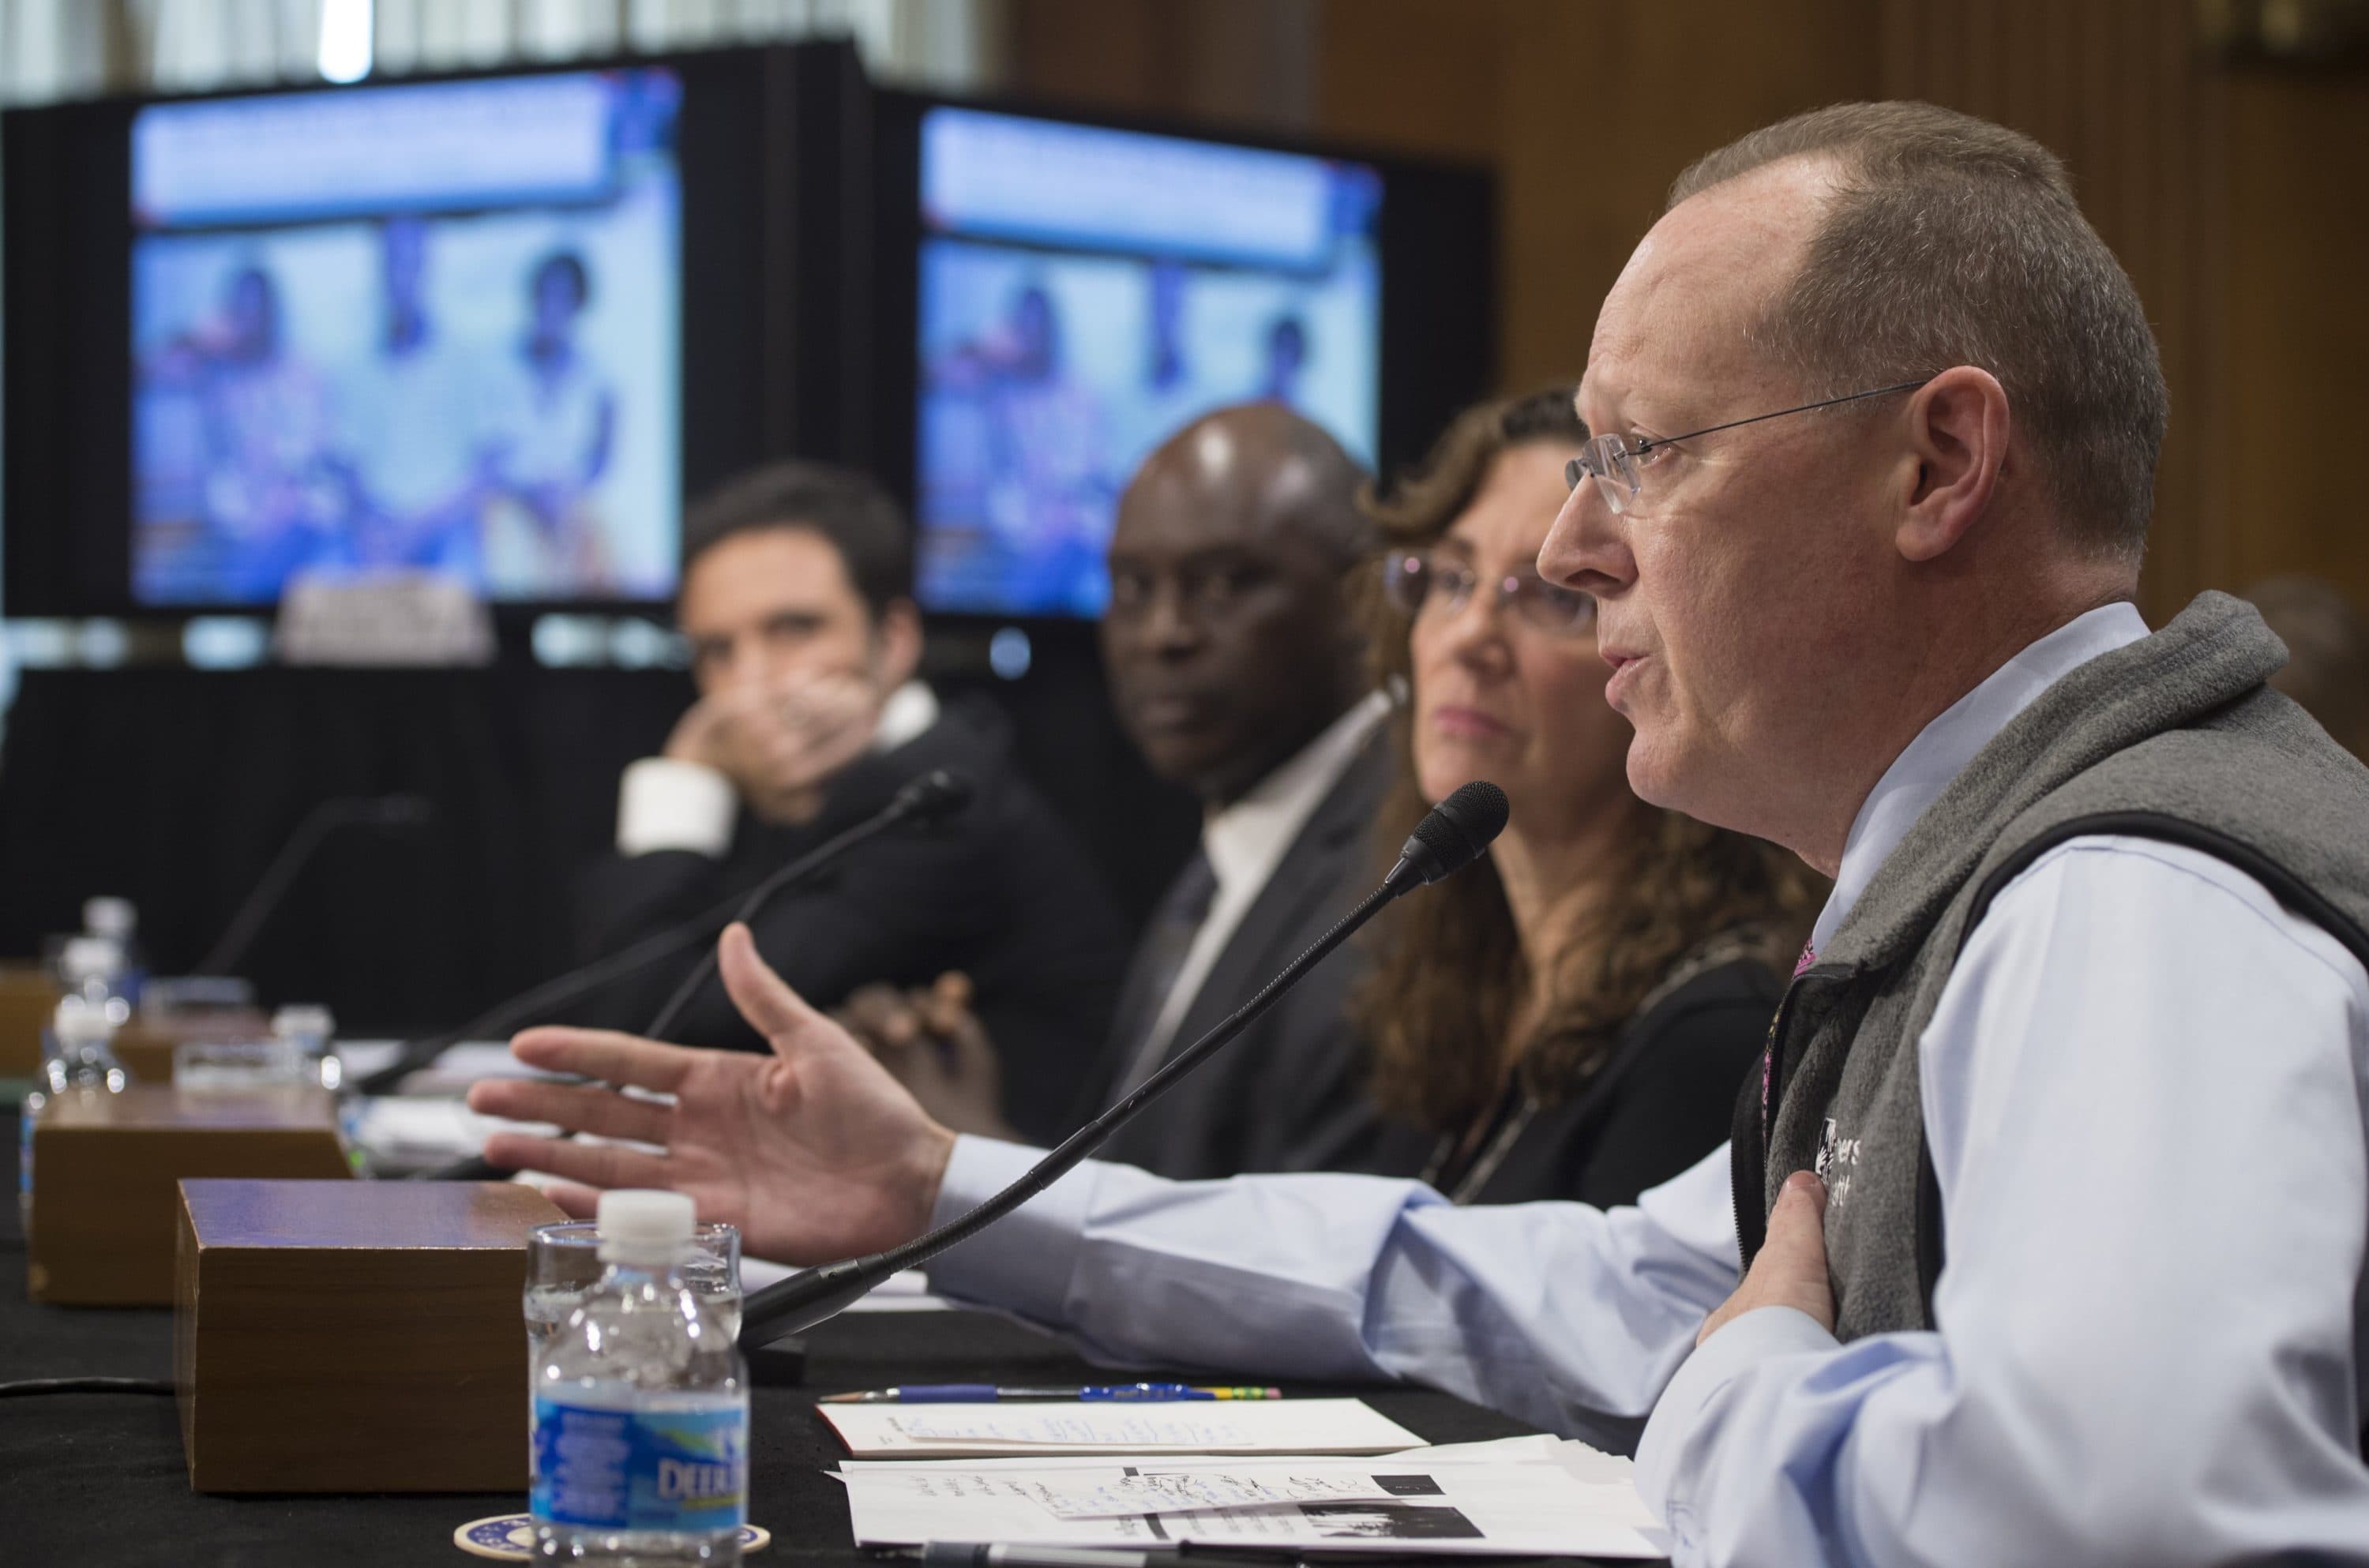 Paul Farmer (R), co-founder of Partners in Health, testifies on the international response to the ebola crisis during a Senate Foreign Relations African Affairs Subcommittee hearing on Capitol Hill in Washington, DC, December 10, 2014. (Saul Loeb/AFP via Getty Images)